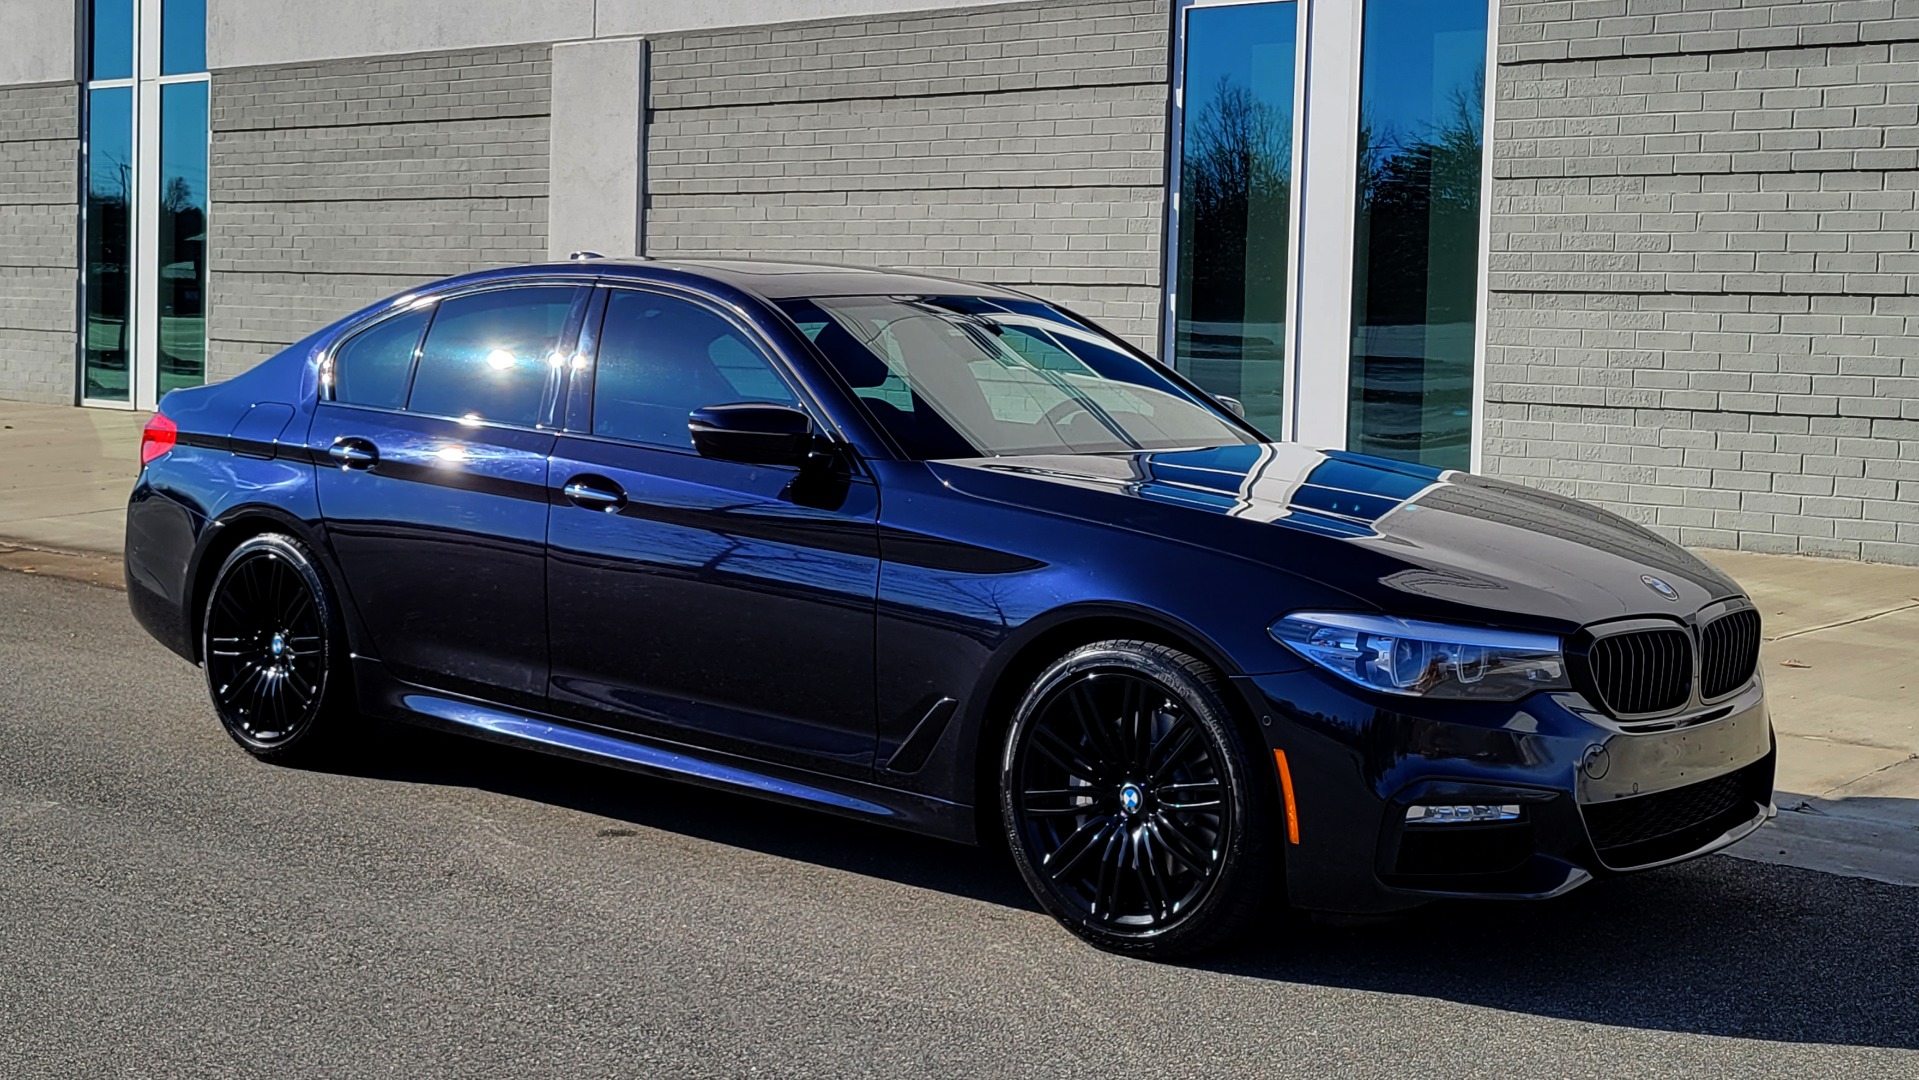 Used 2018 BMW 5 SERIES 540I XDRIVE 3.0L / M-SPORT / NAV / WIFI / SUNROOF / REARVIEW for sale $41,595 at Formula Imports in Charlotte NC 28227 10